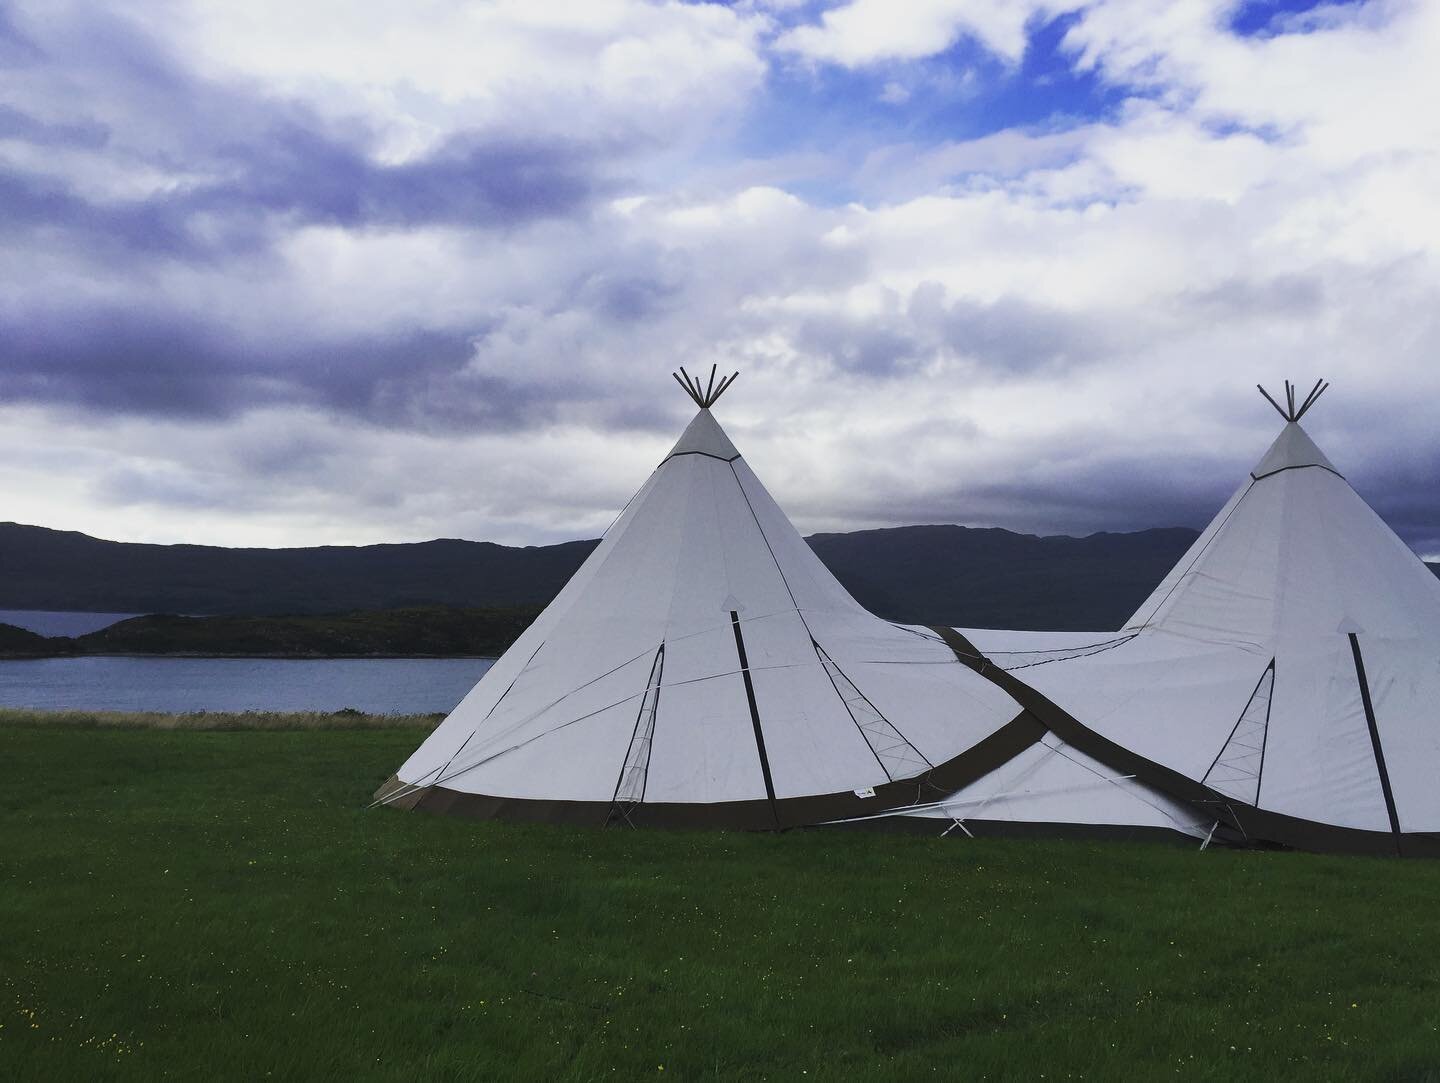 We travel to some amazing places with our work and it&rsquo;s pretty special to look back and see where we&rsquo;ve been. This is a quick flashback to a  beautiful wedding we set up overlooking Loch Carron in the Scottish highlands in 2018. It took u